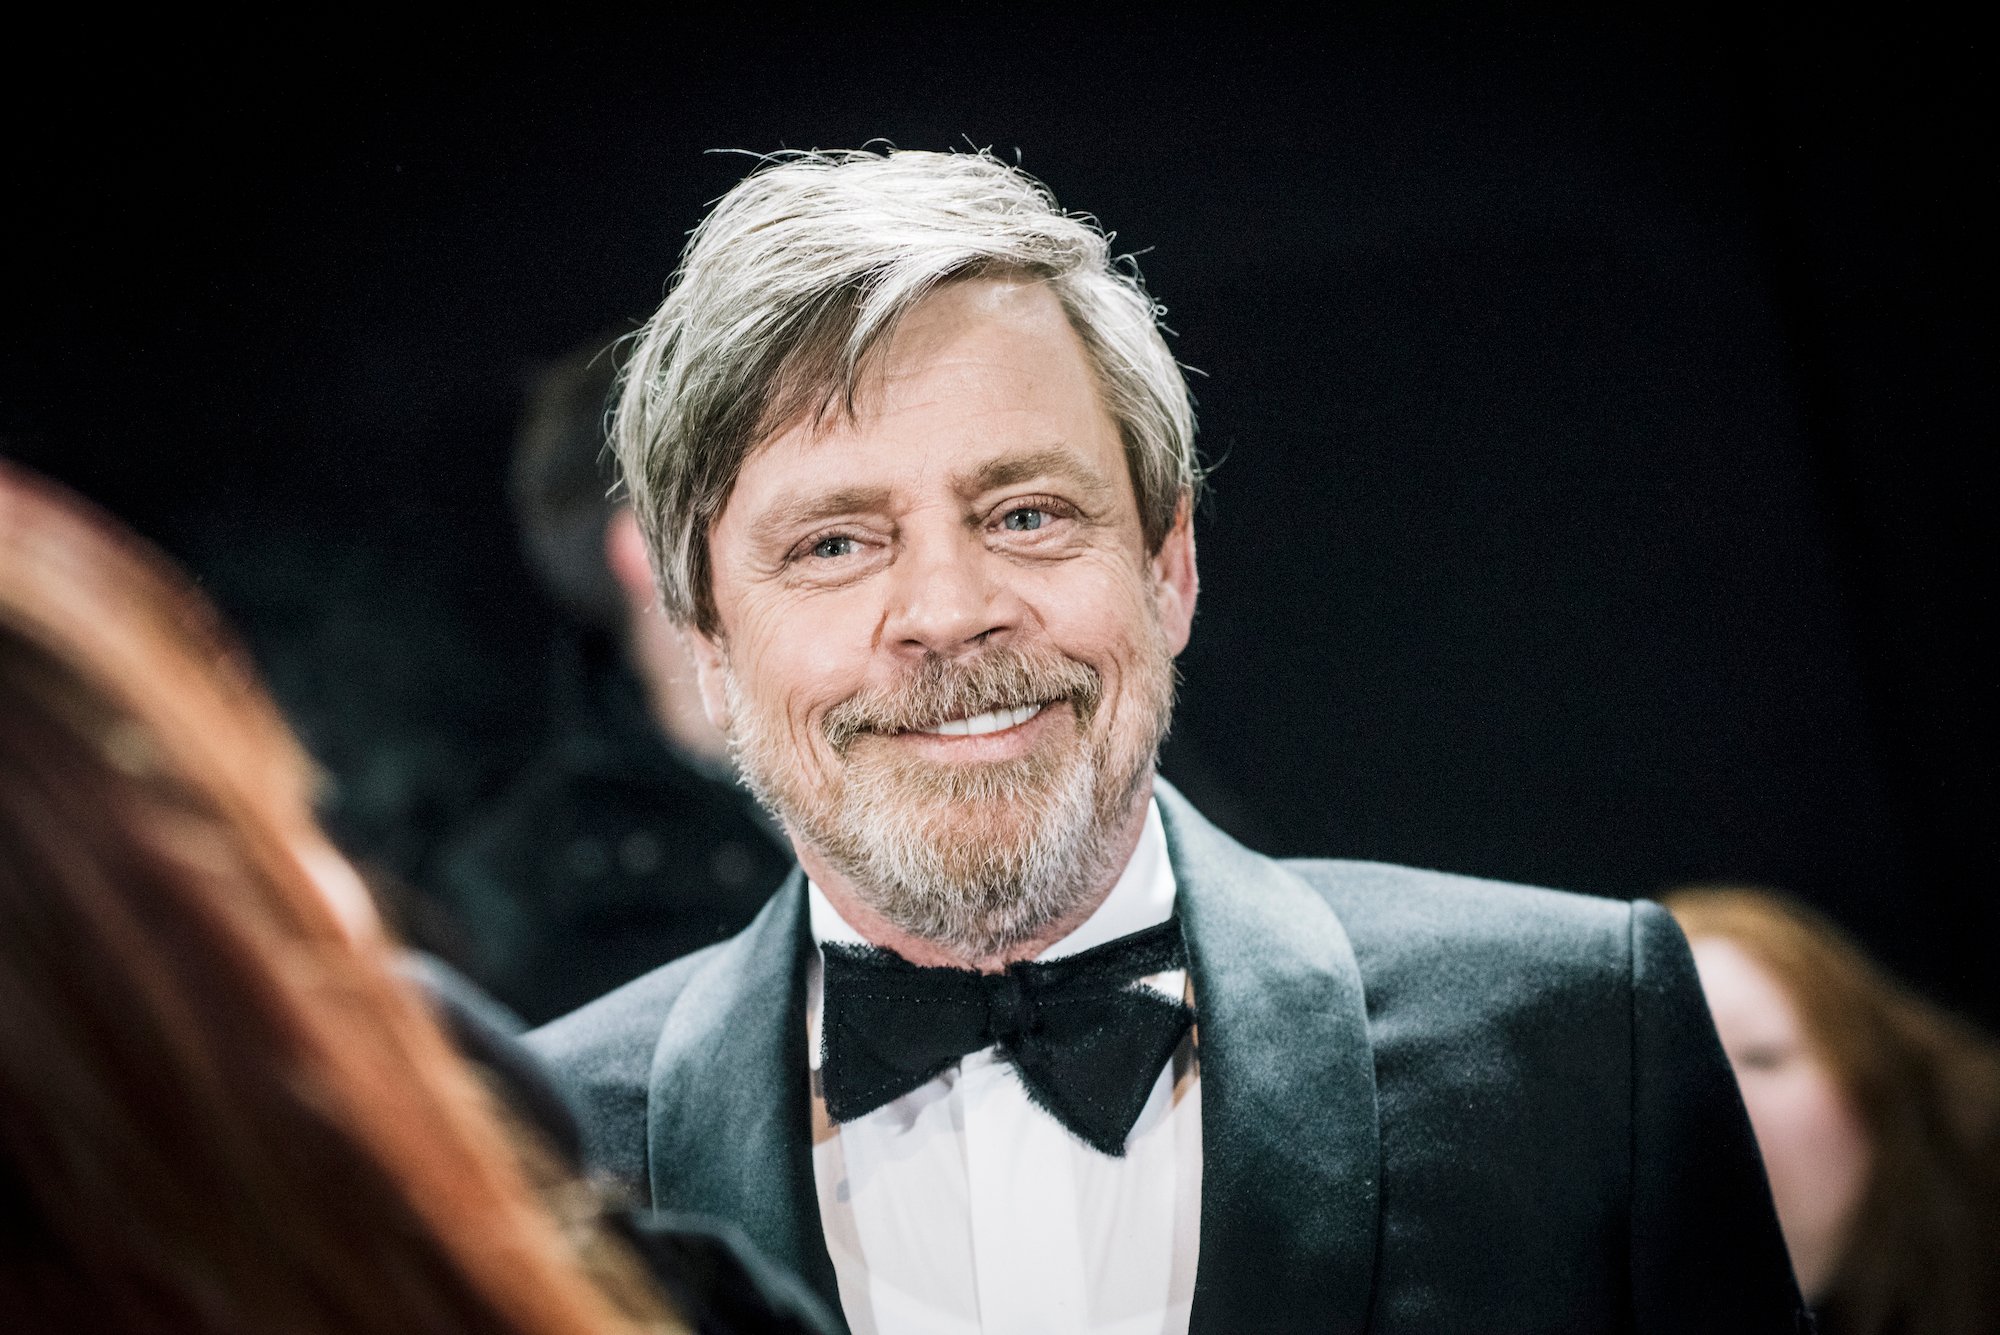 Mark Hamill smiling, wearing a suit and bowtie